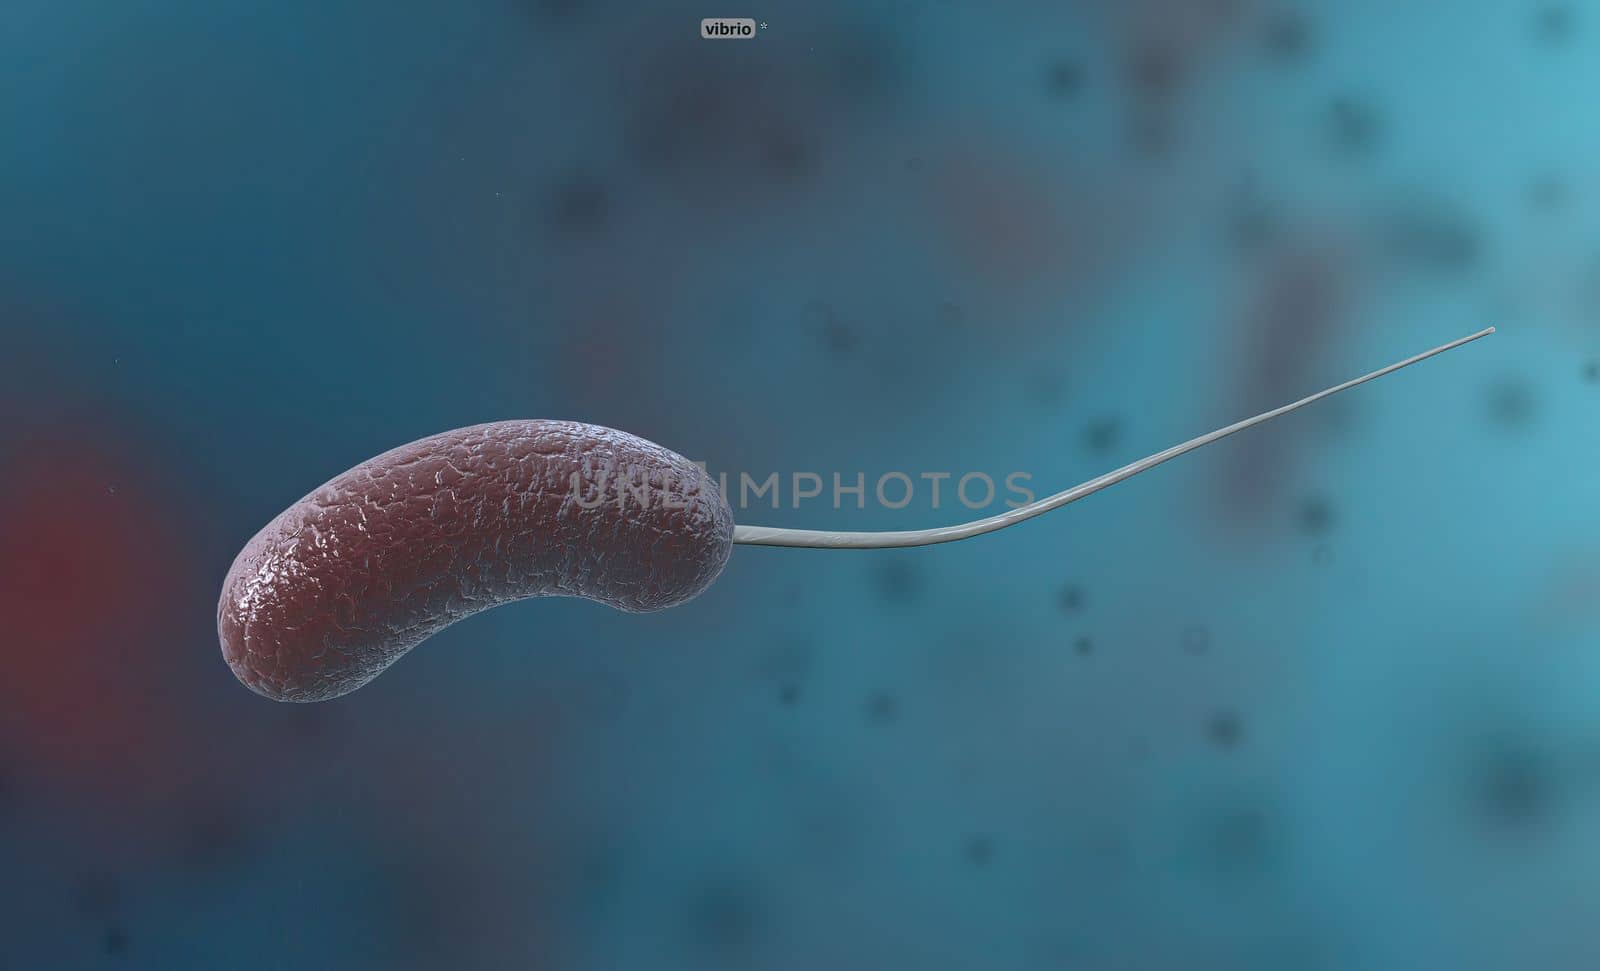 Vibrio is a genus of bacteria consisting of bent rod-shaped gram-negative bacteria. Some species cause food-borne diseases. 3D illustration